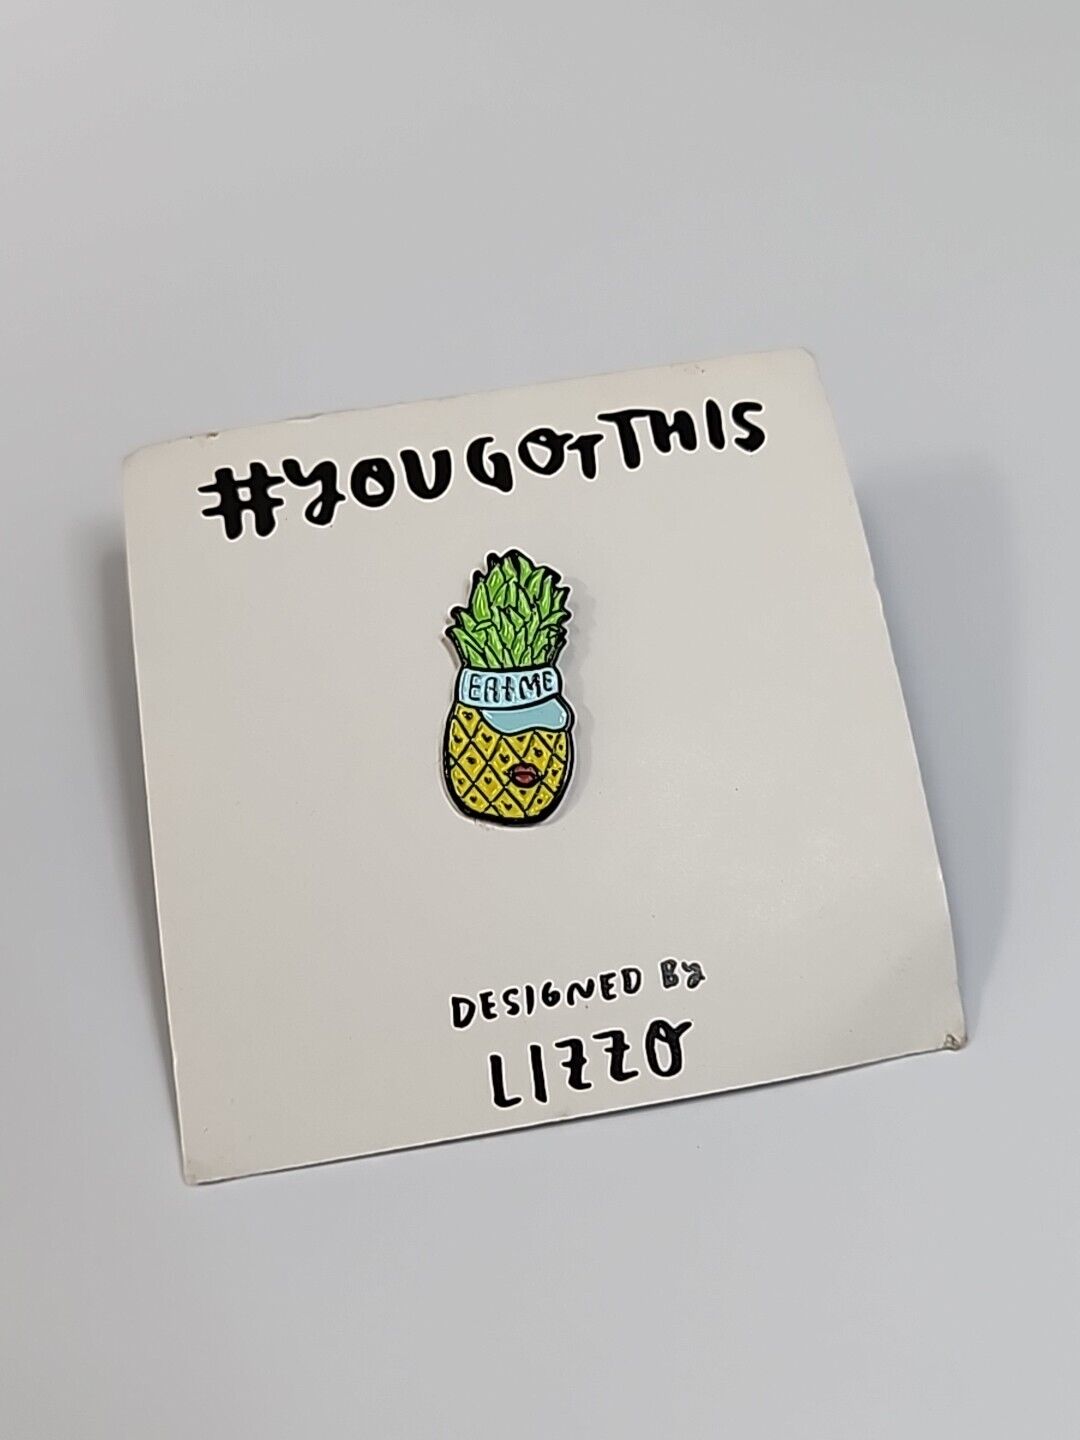 Pineapple With Eat Me Visor Lapel Pin Designed By Lizzo #yougotthis